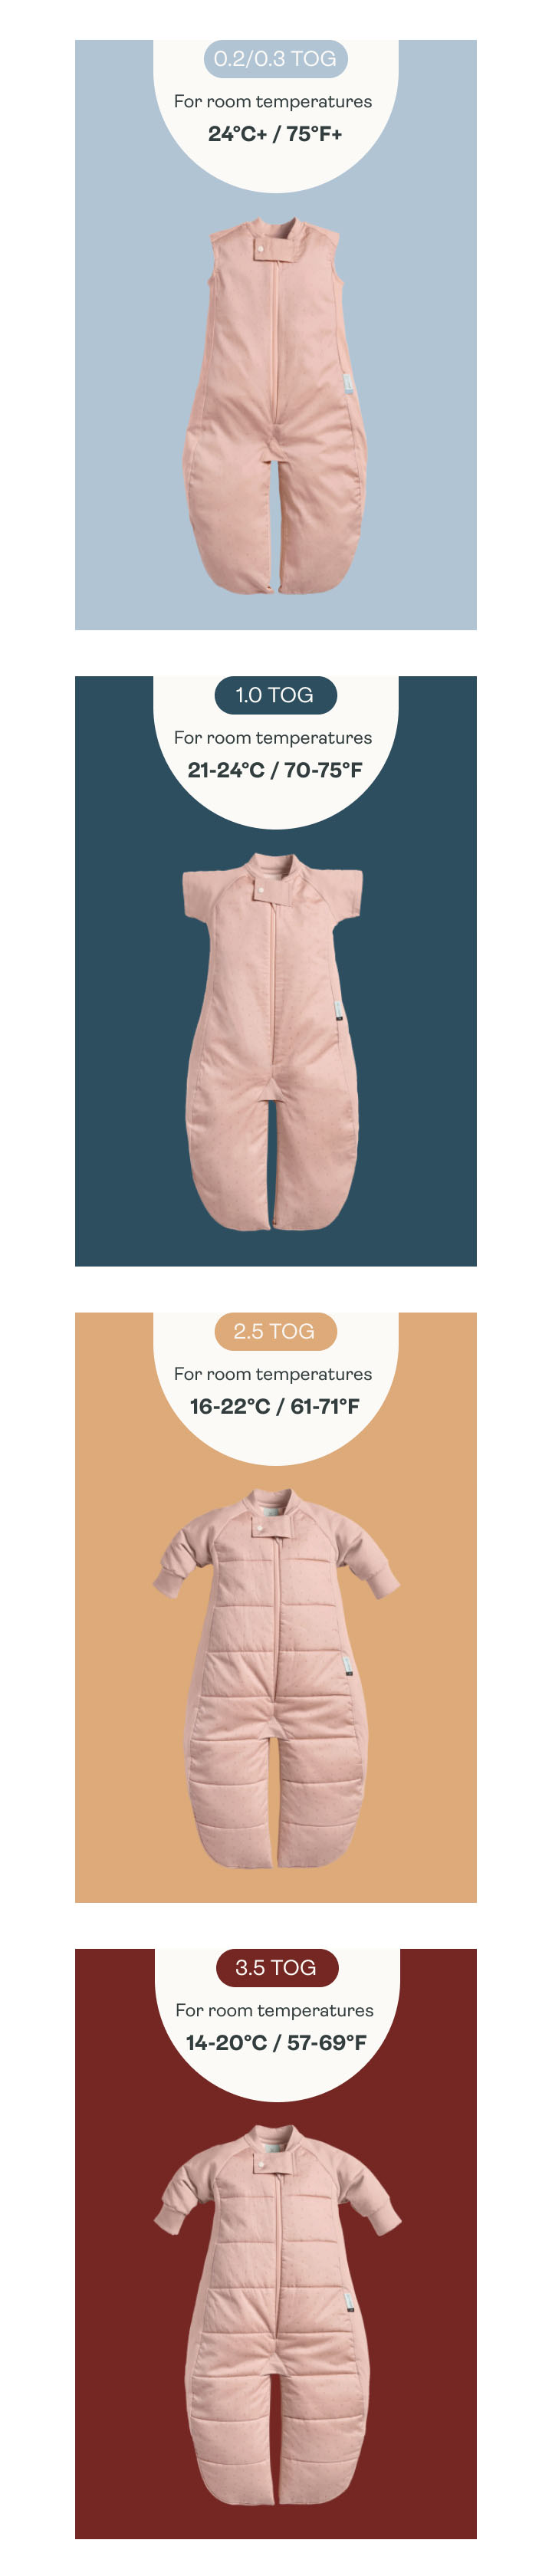 TOG options for the ergoPouch Sleep Suit Bag